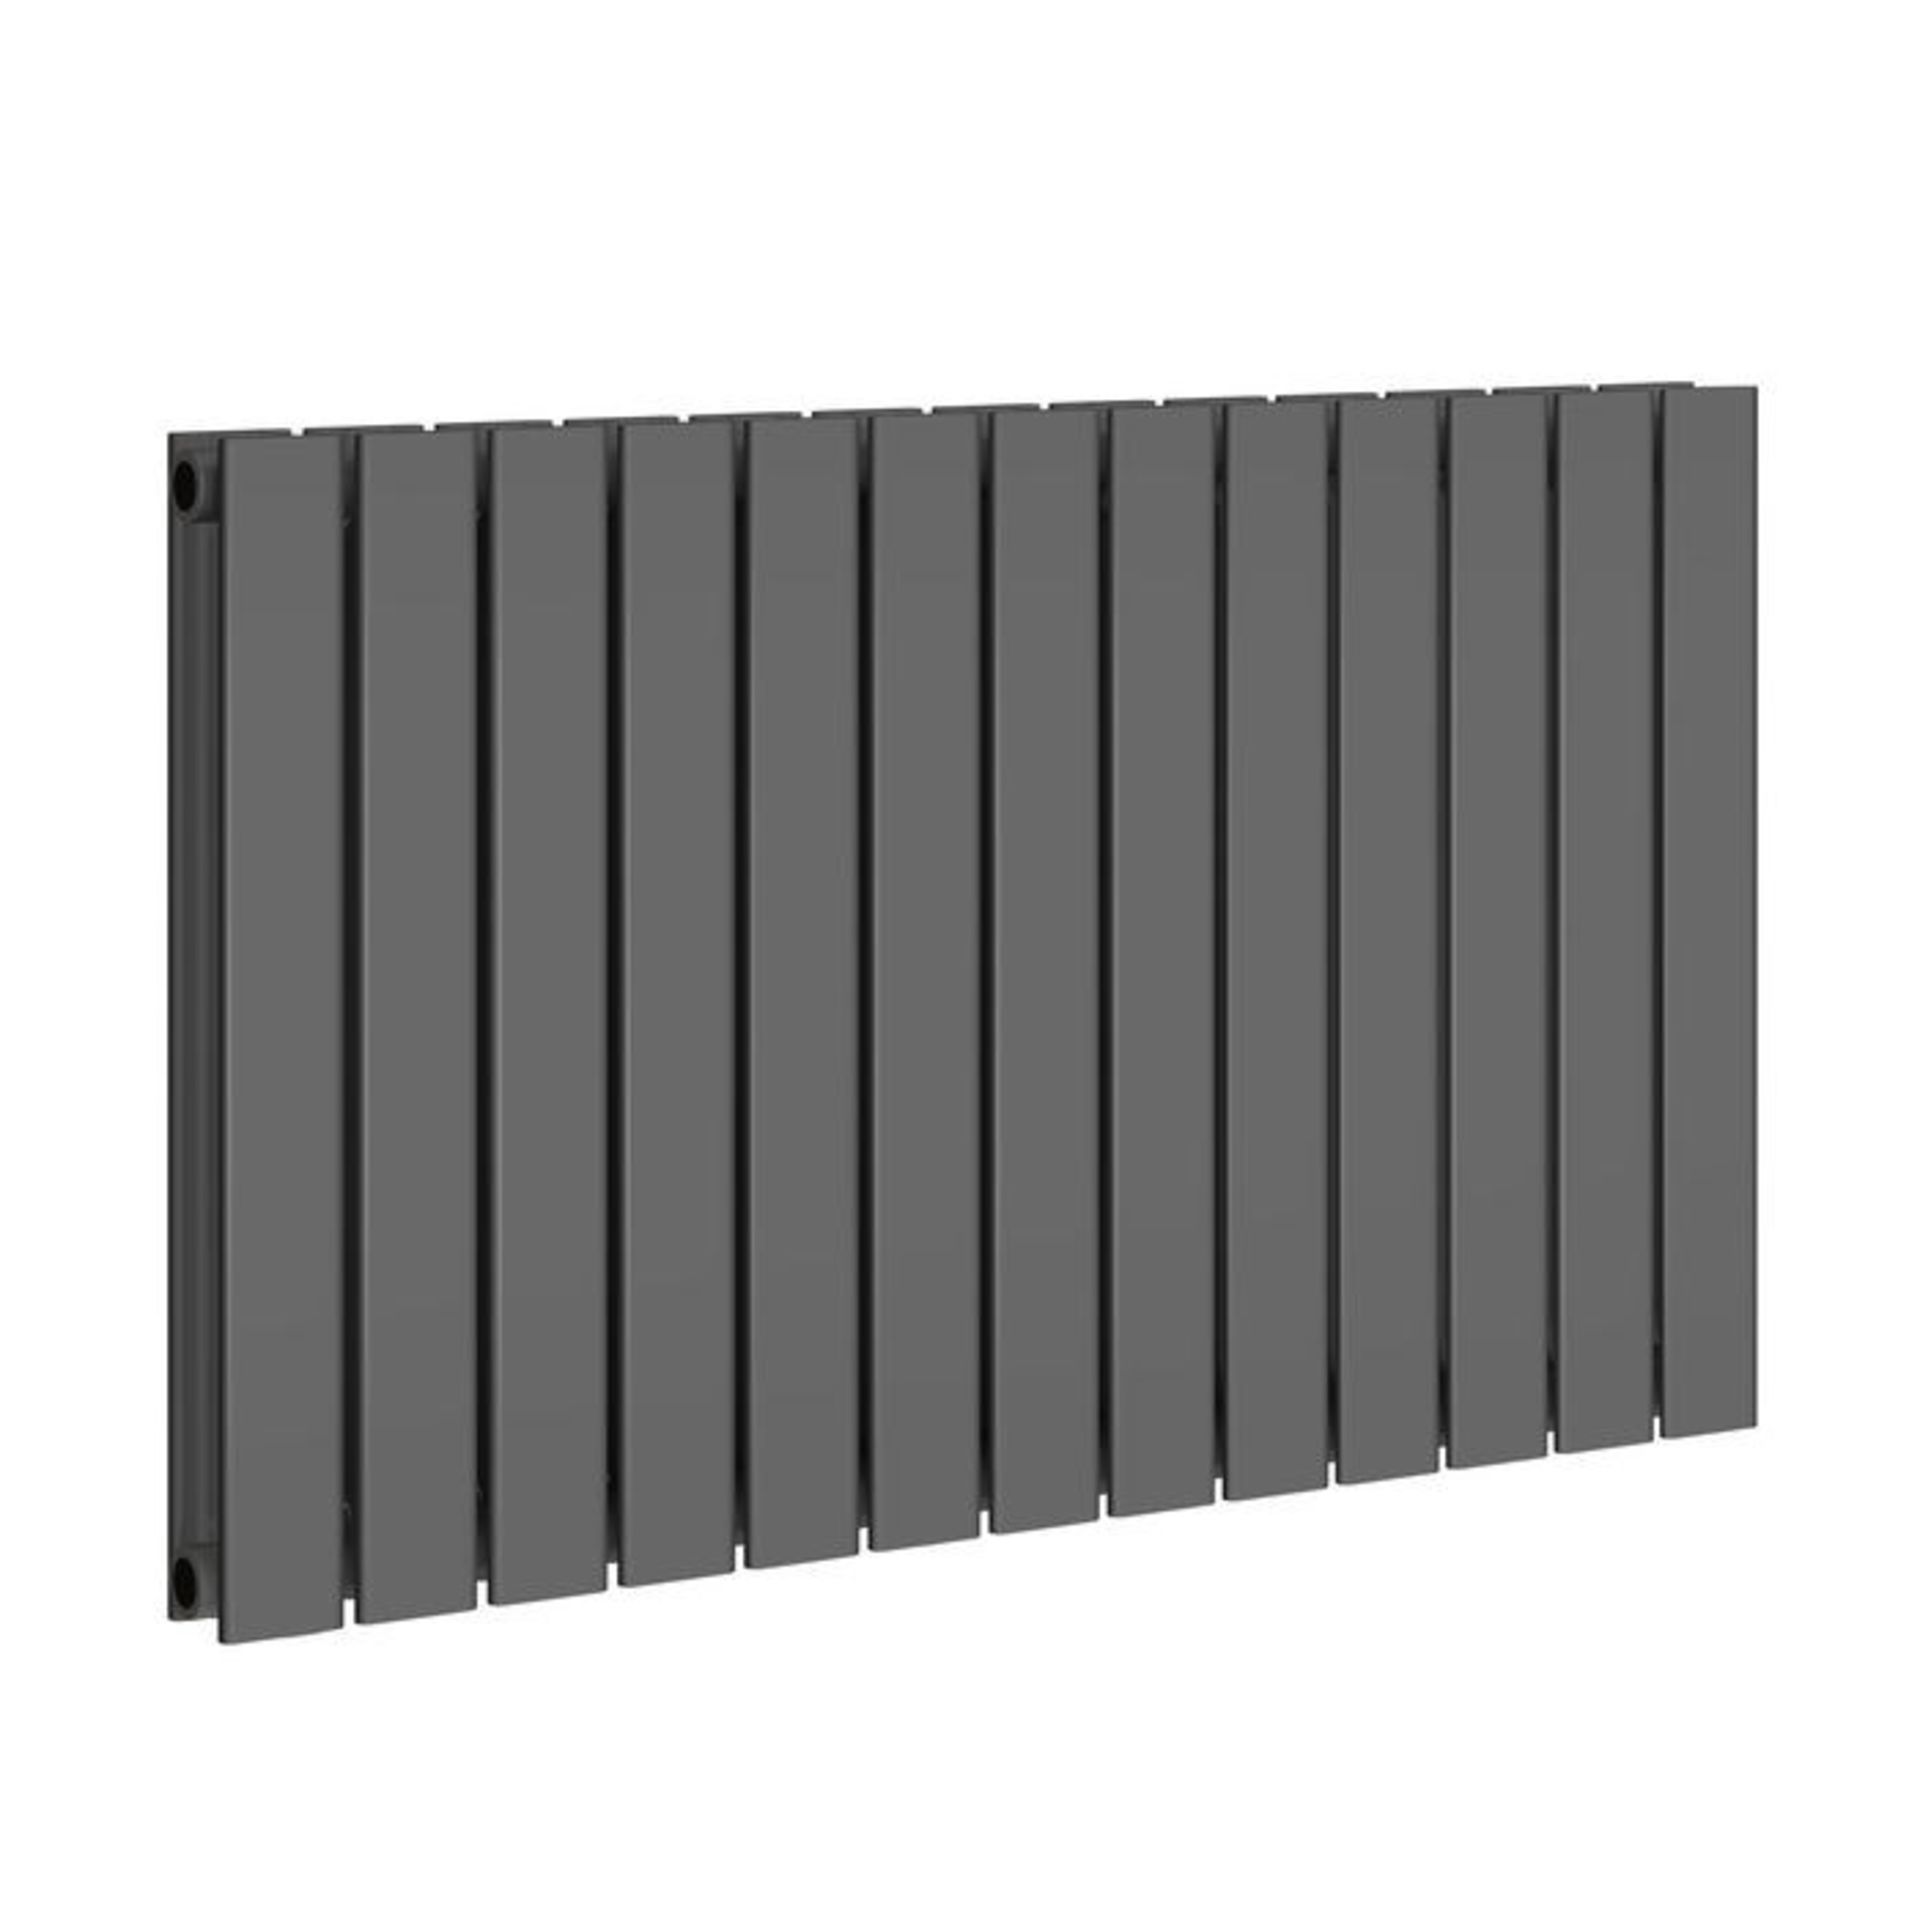 PALLET TO CONTAIN 6 x BRAND NEW BOXED 600x1210mm Anthracite Double Flat Panel Horizontal Radiat... - Image 5 of 5